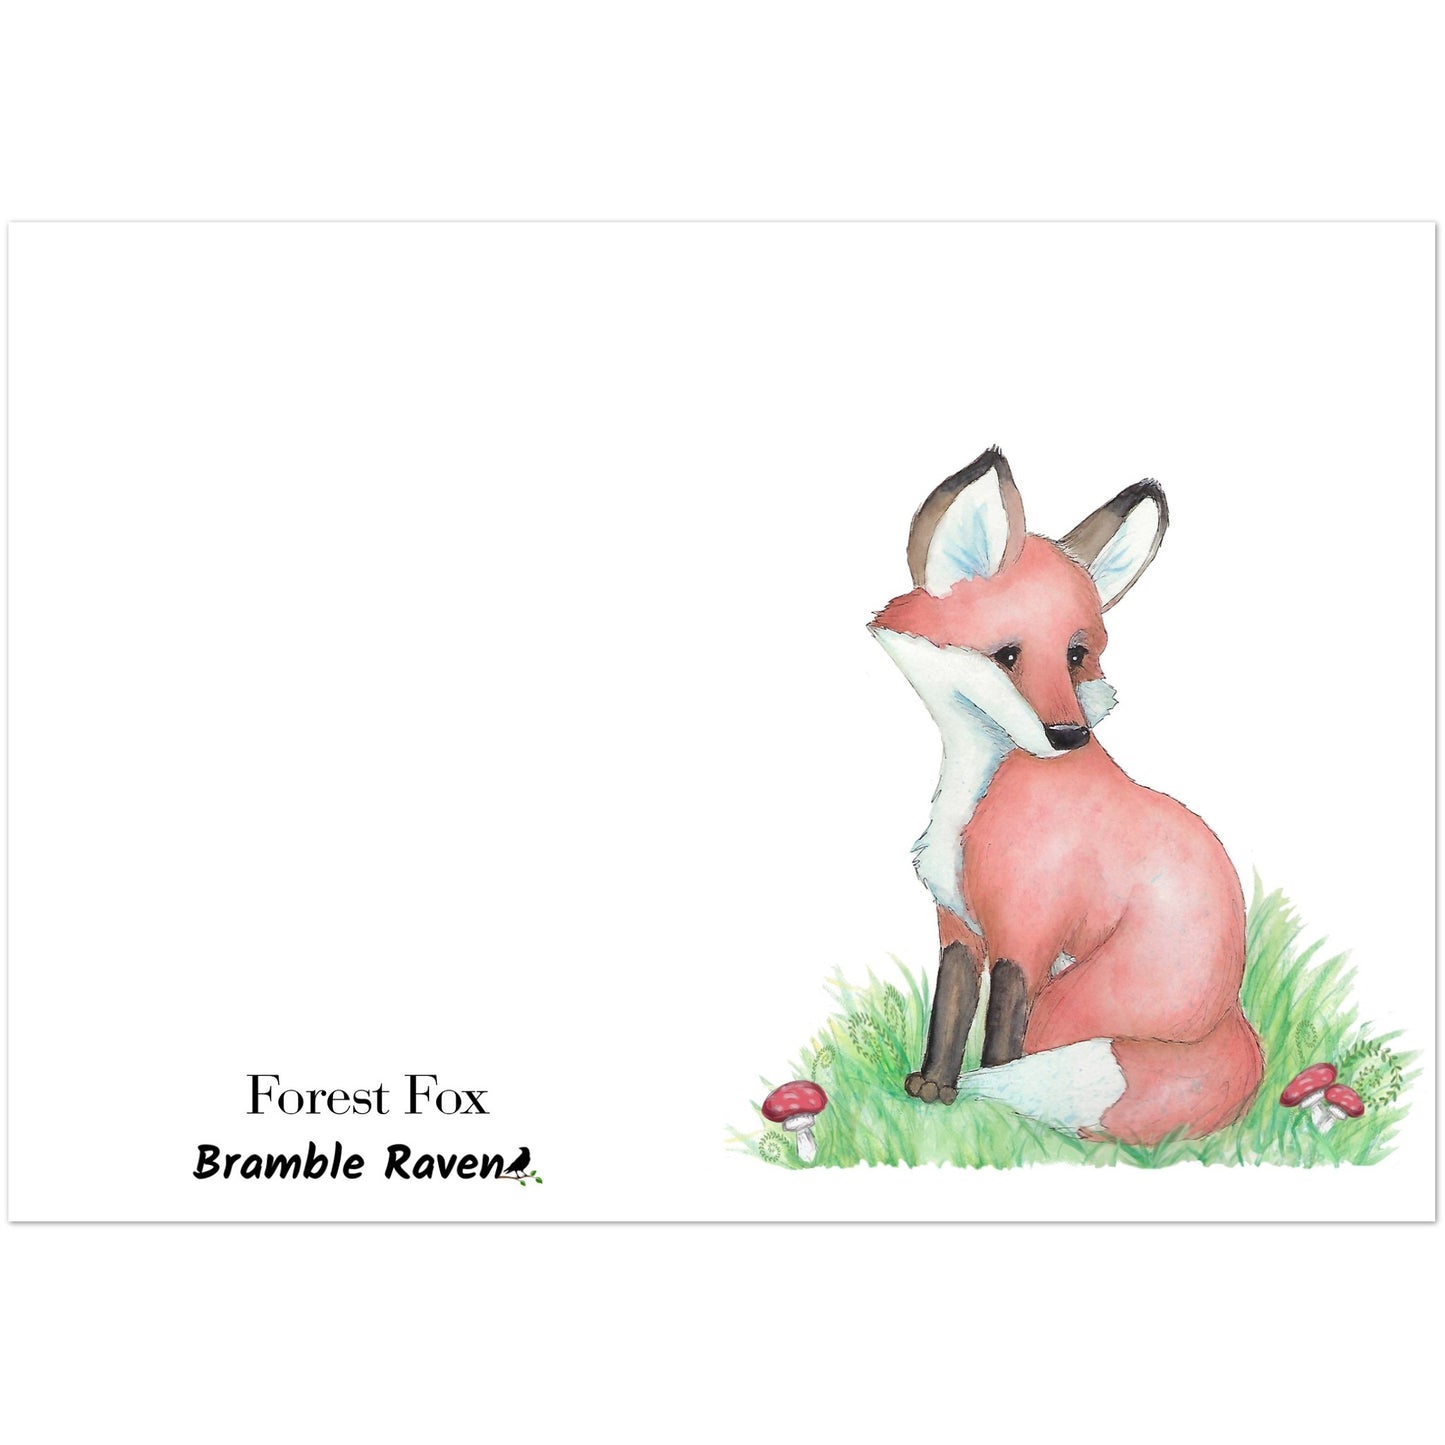 Pack of ten 5 x 7 inch greeting cards with envelopes. Front of card has watercolor fox nestled in the grass by mushrooms and ferns. Inside is blank. Cards are 130 lb 350 gsm coated paperboard with vibrant printing.  